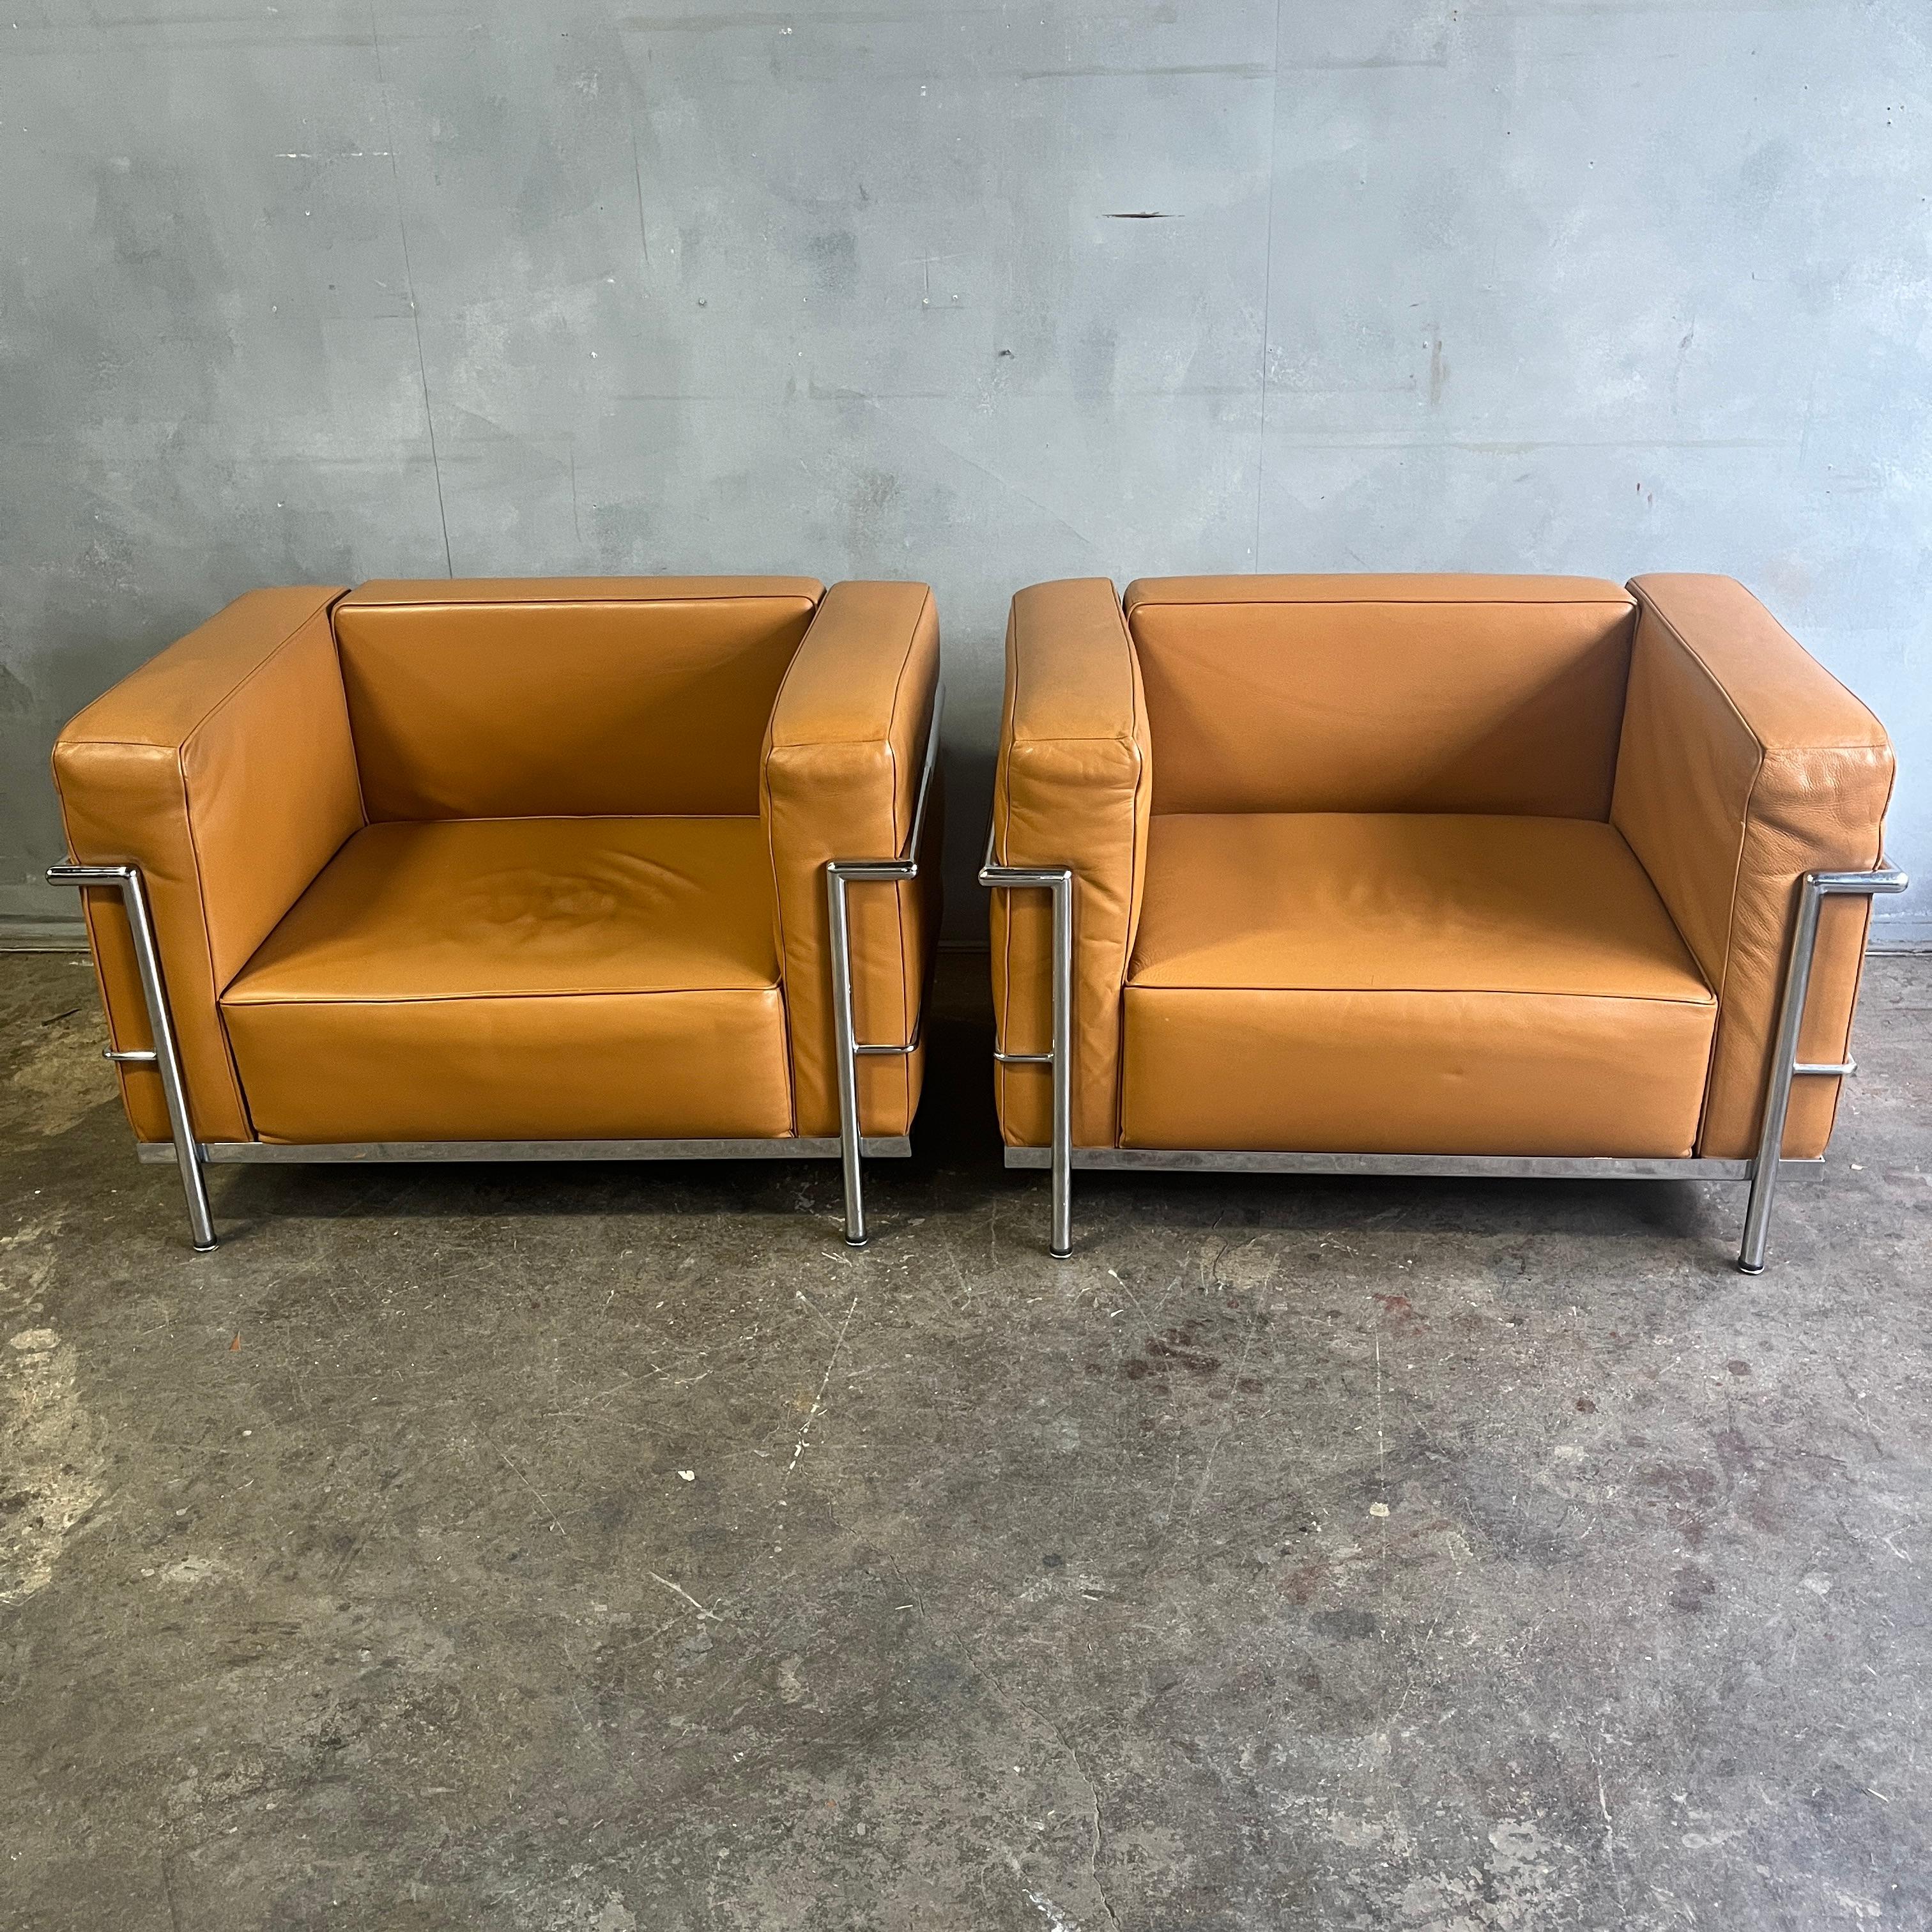 A pair of lounge or club chairs by Le Corbusier, LC3 Grand Confort in Tobacco Leather / saddle brown. Triple chrome plated steel. Gordon International

Labeled.